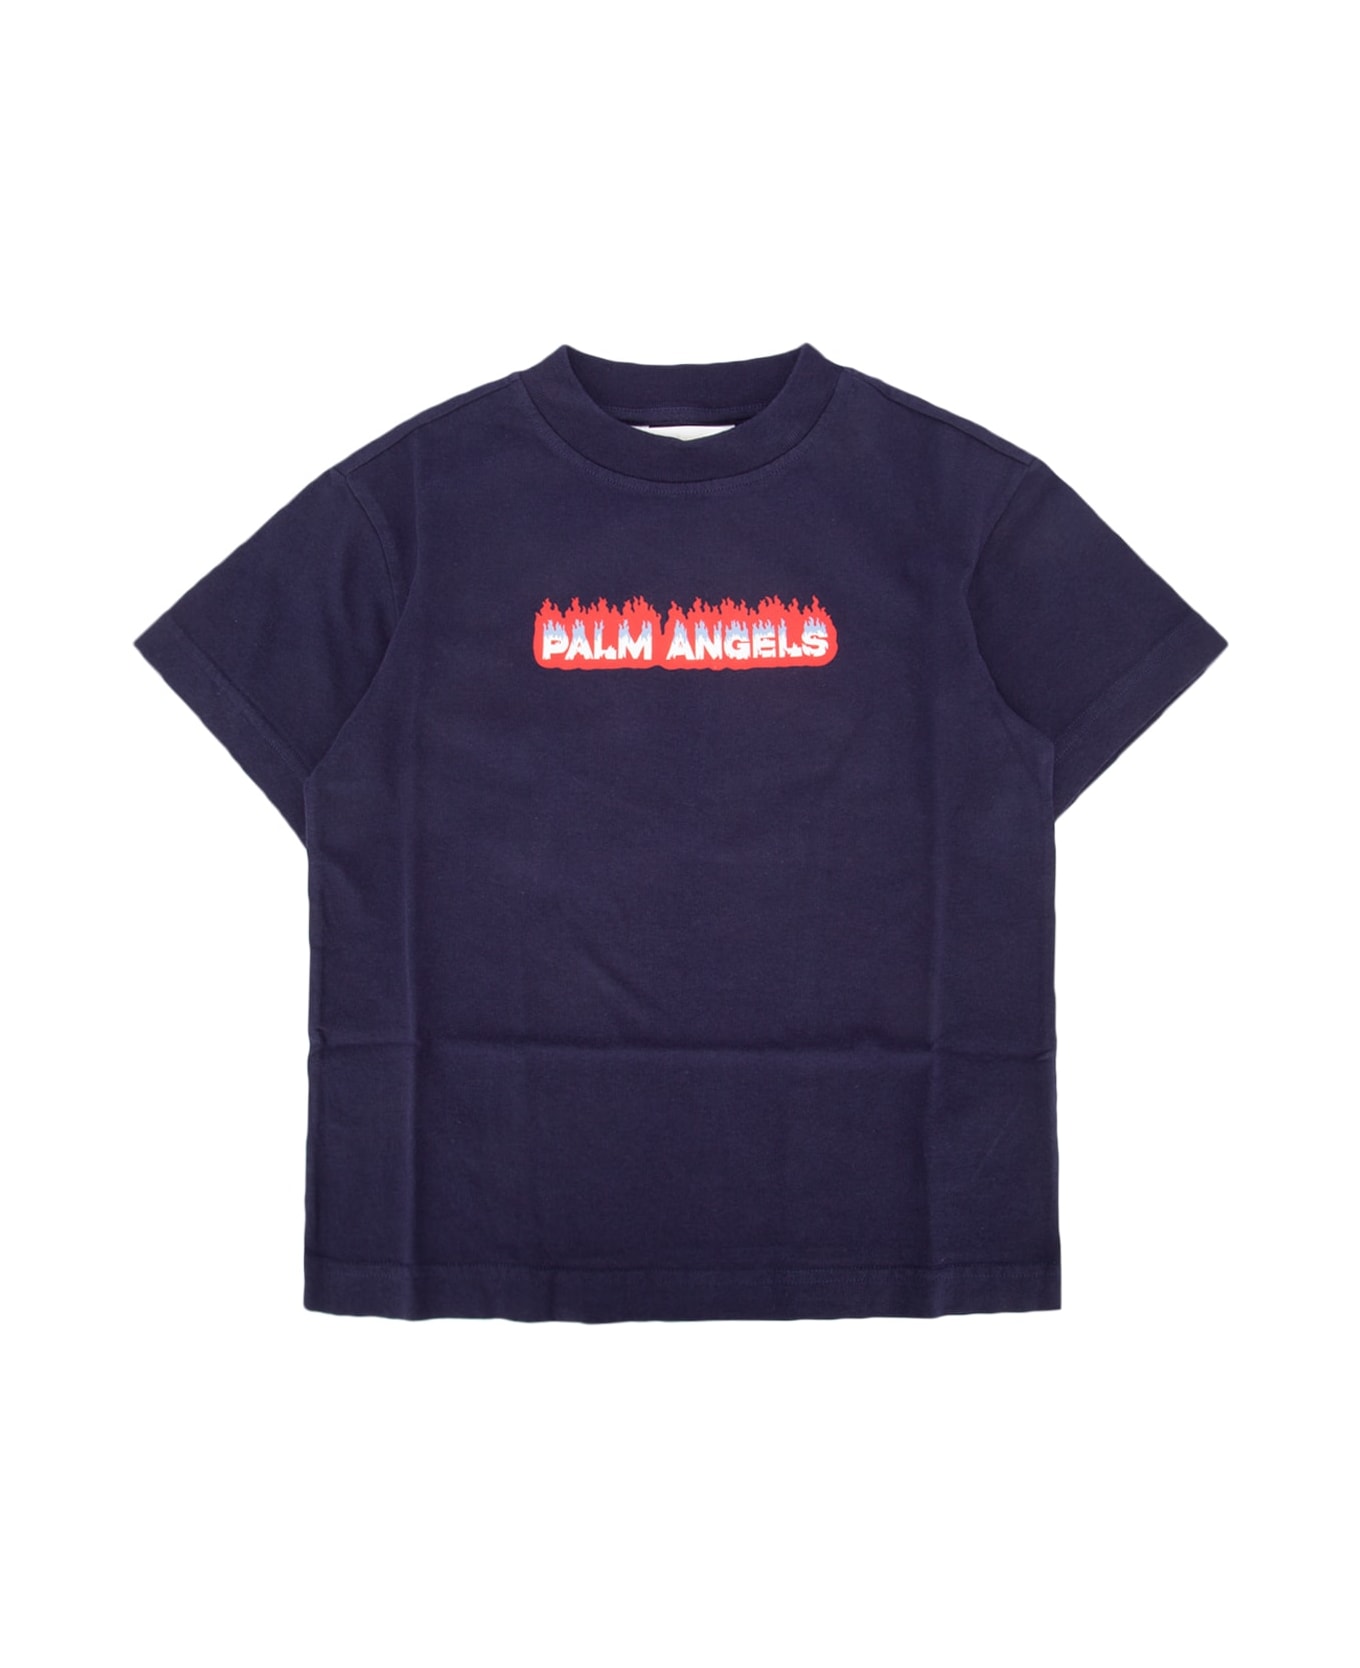 Palm Angels T-shirt - NAVYBLUERED Tシャツ＆ポロシャツ